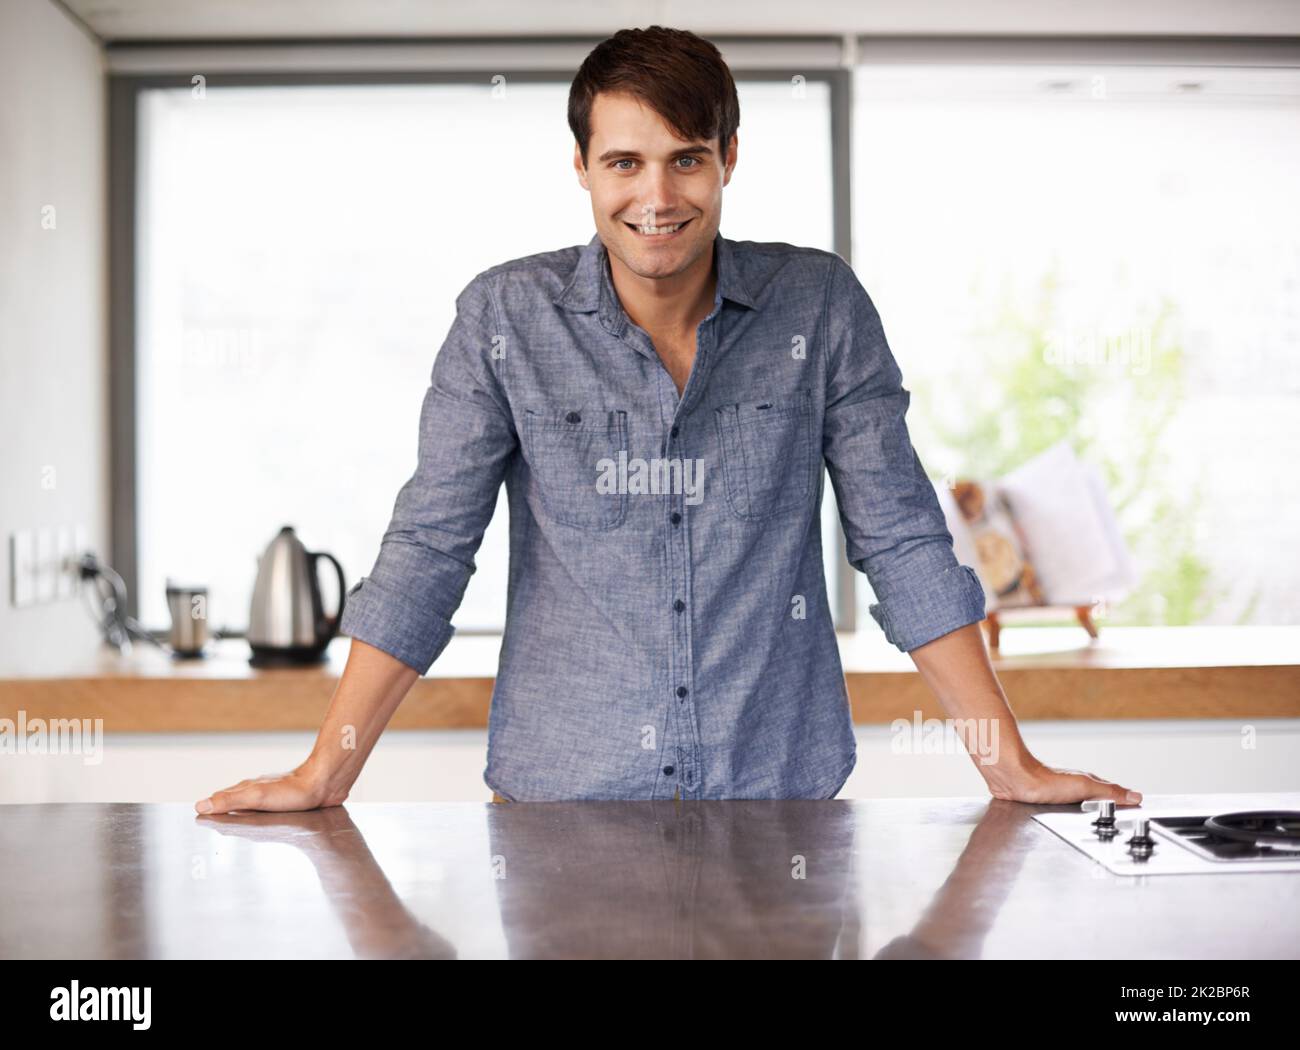 There is no place like home. Portrait of a handsome young man standing behind his kitchen countertop. Stock Photo